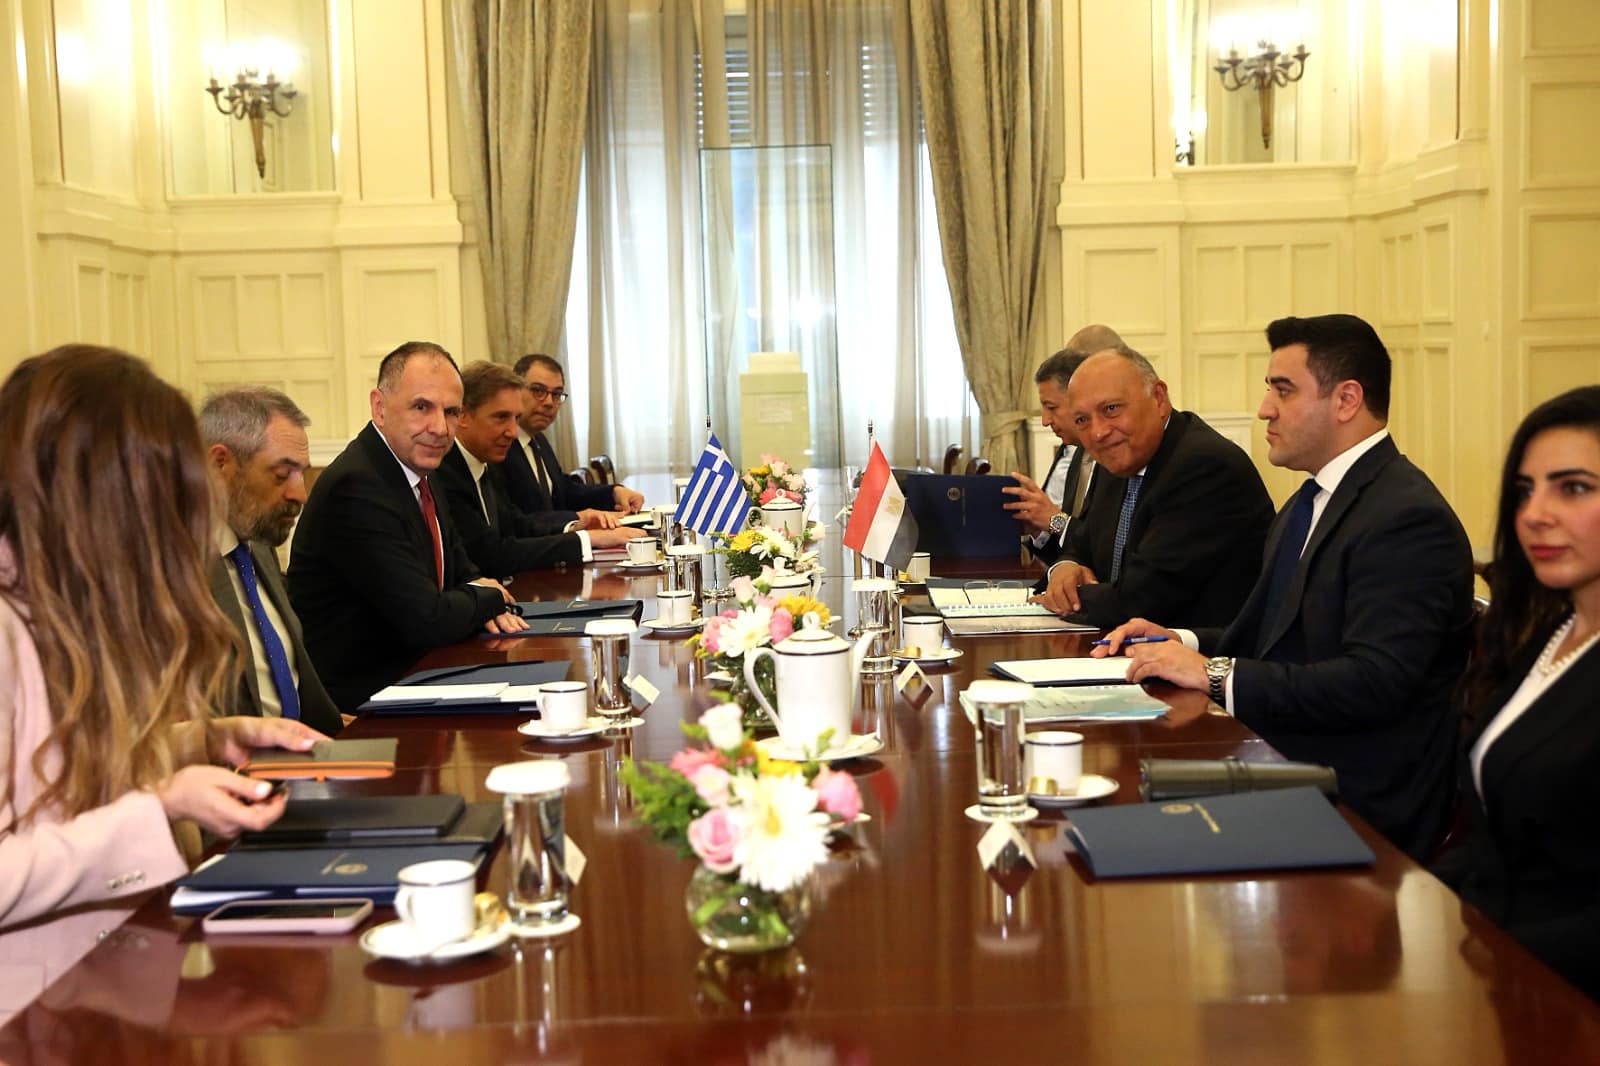 Egypt's Shoukry, Greek counterpart discuss regional security, cooperation in Athens - Dailynewsegypt